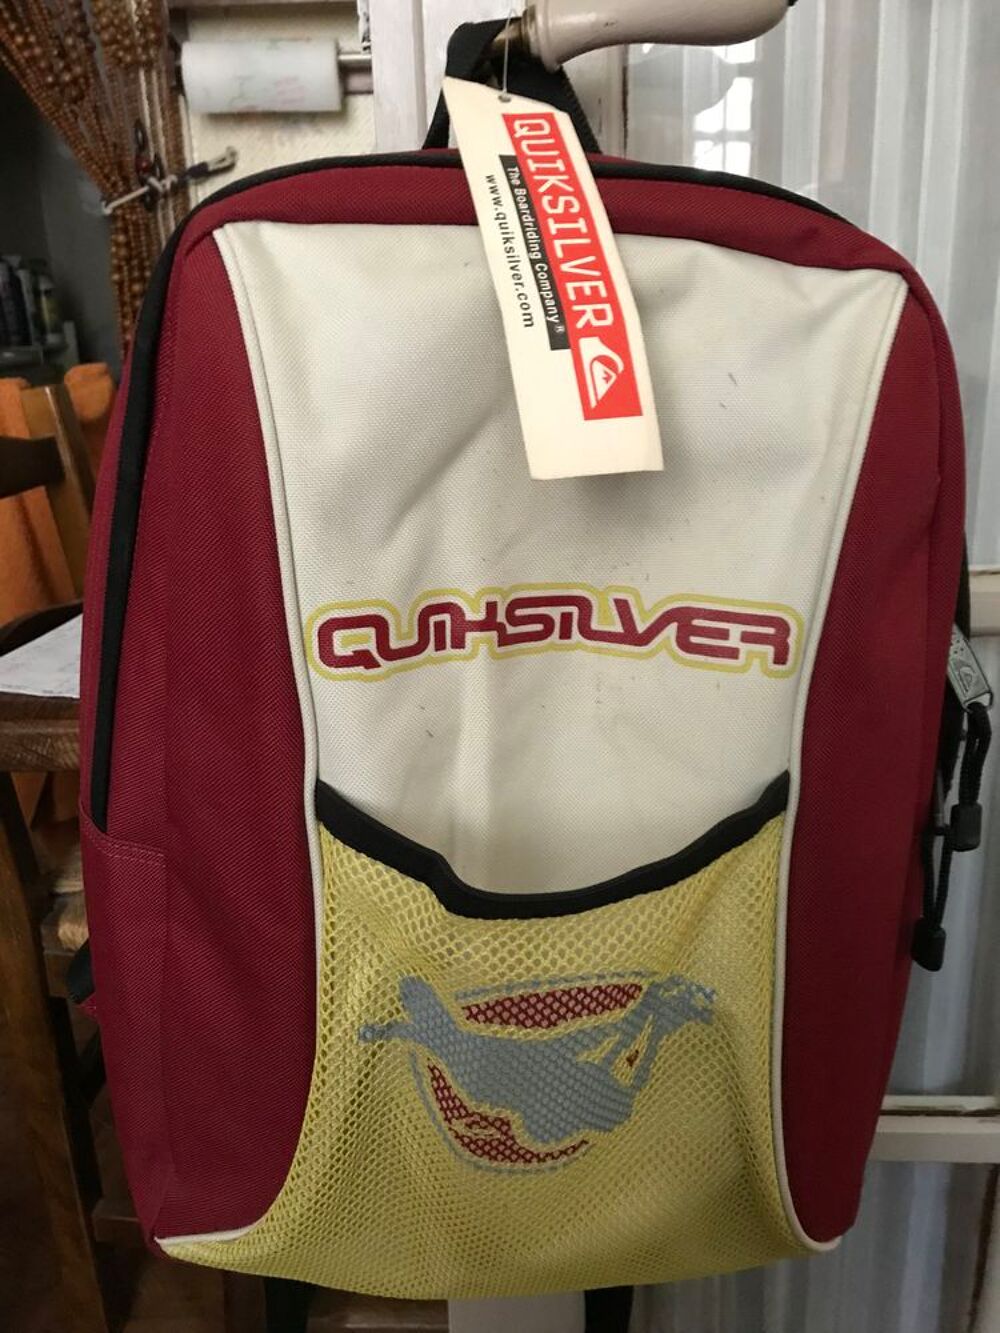 Sac &agrave; dos Quiksilver rouge/&eacute;cru Maroquinerie